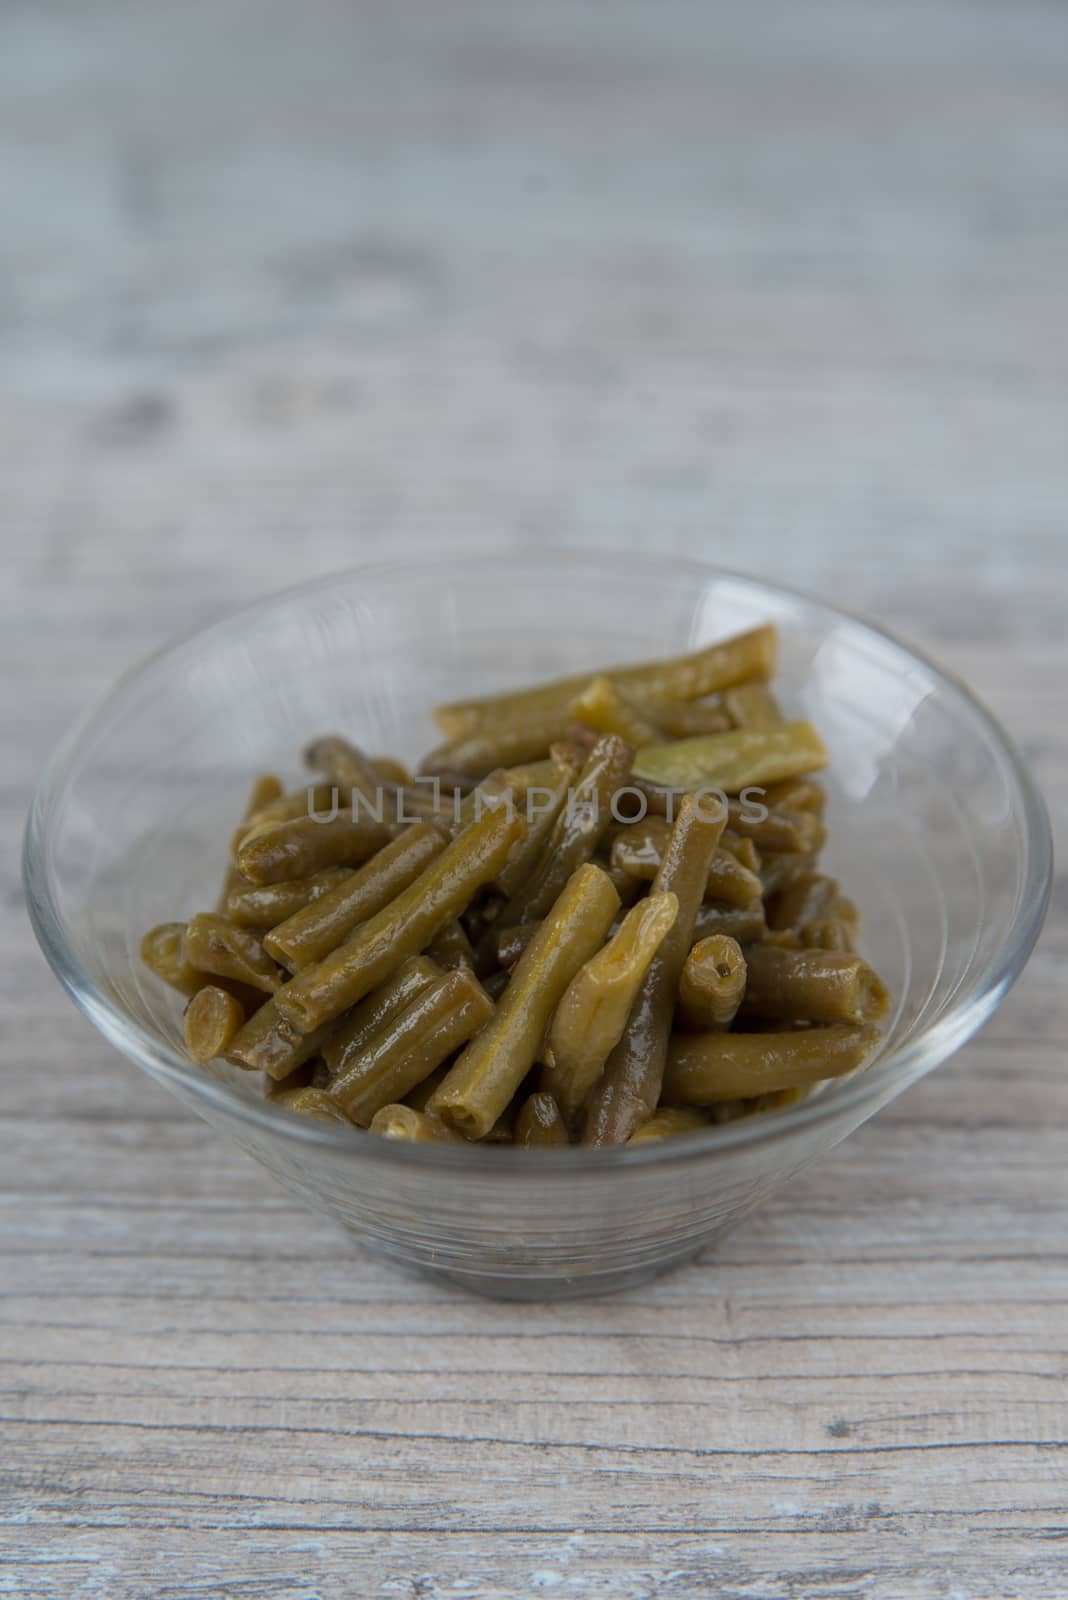 Plate of the green beans by Linaga